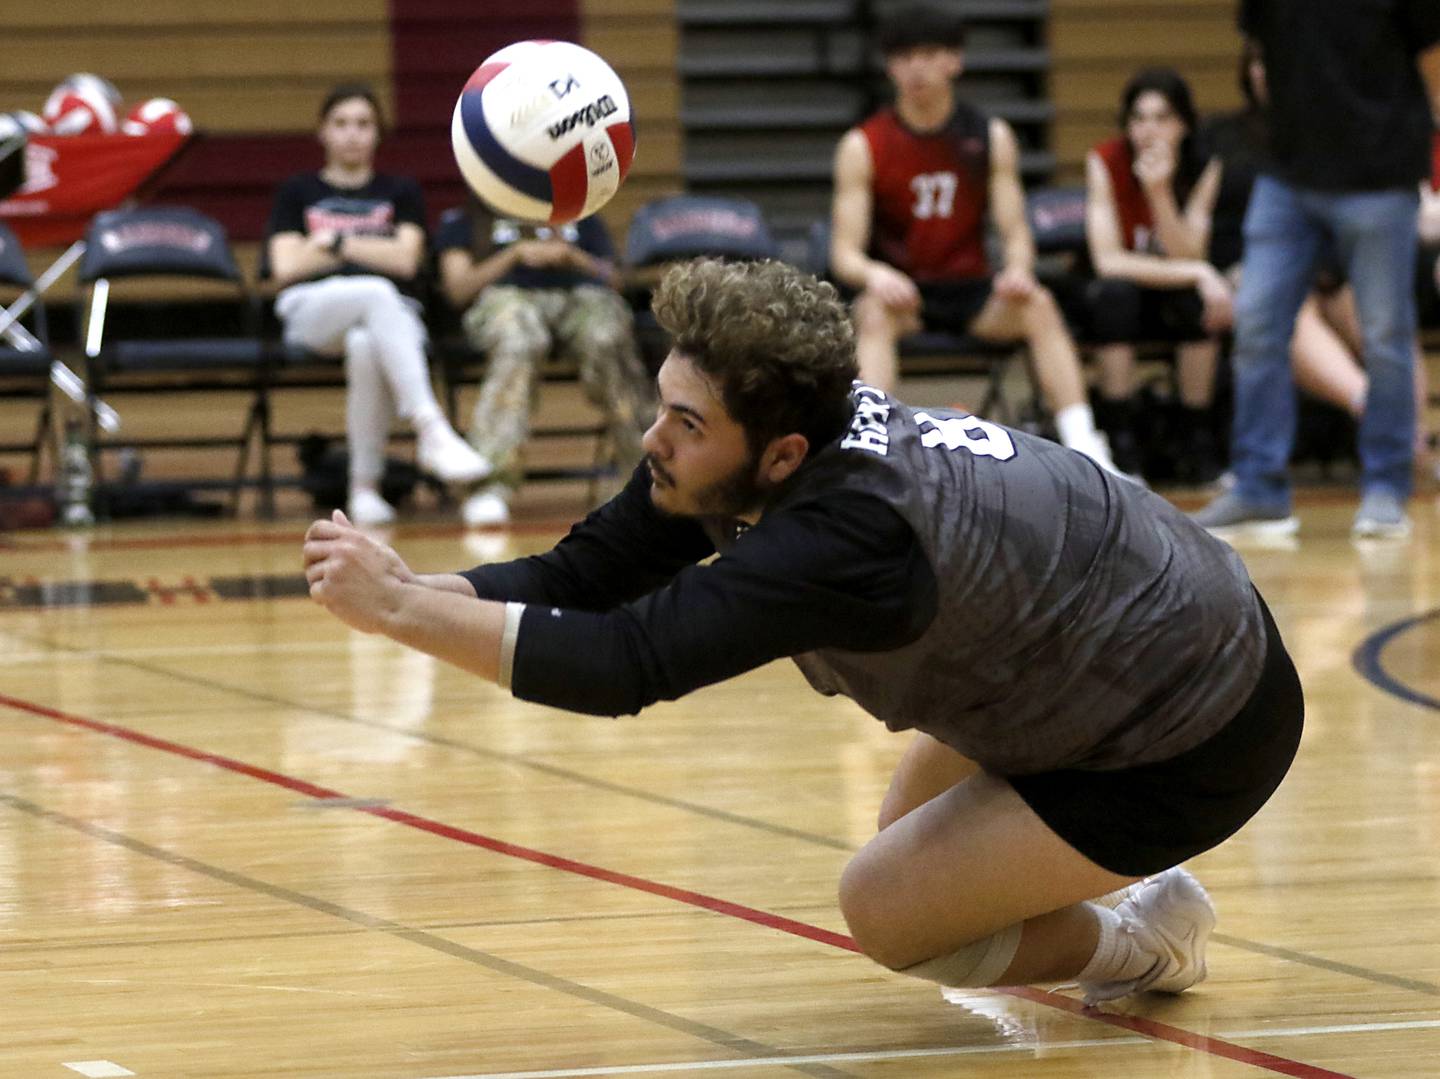 Huntley's Adrian Martinez tries to dig the ball during a nonconference boys volleyball match against St. Charles North Monday, May 8, 2023, at Huntley High School.